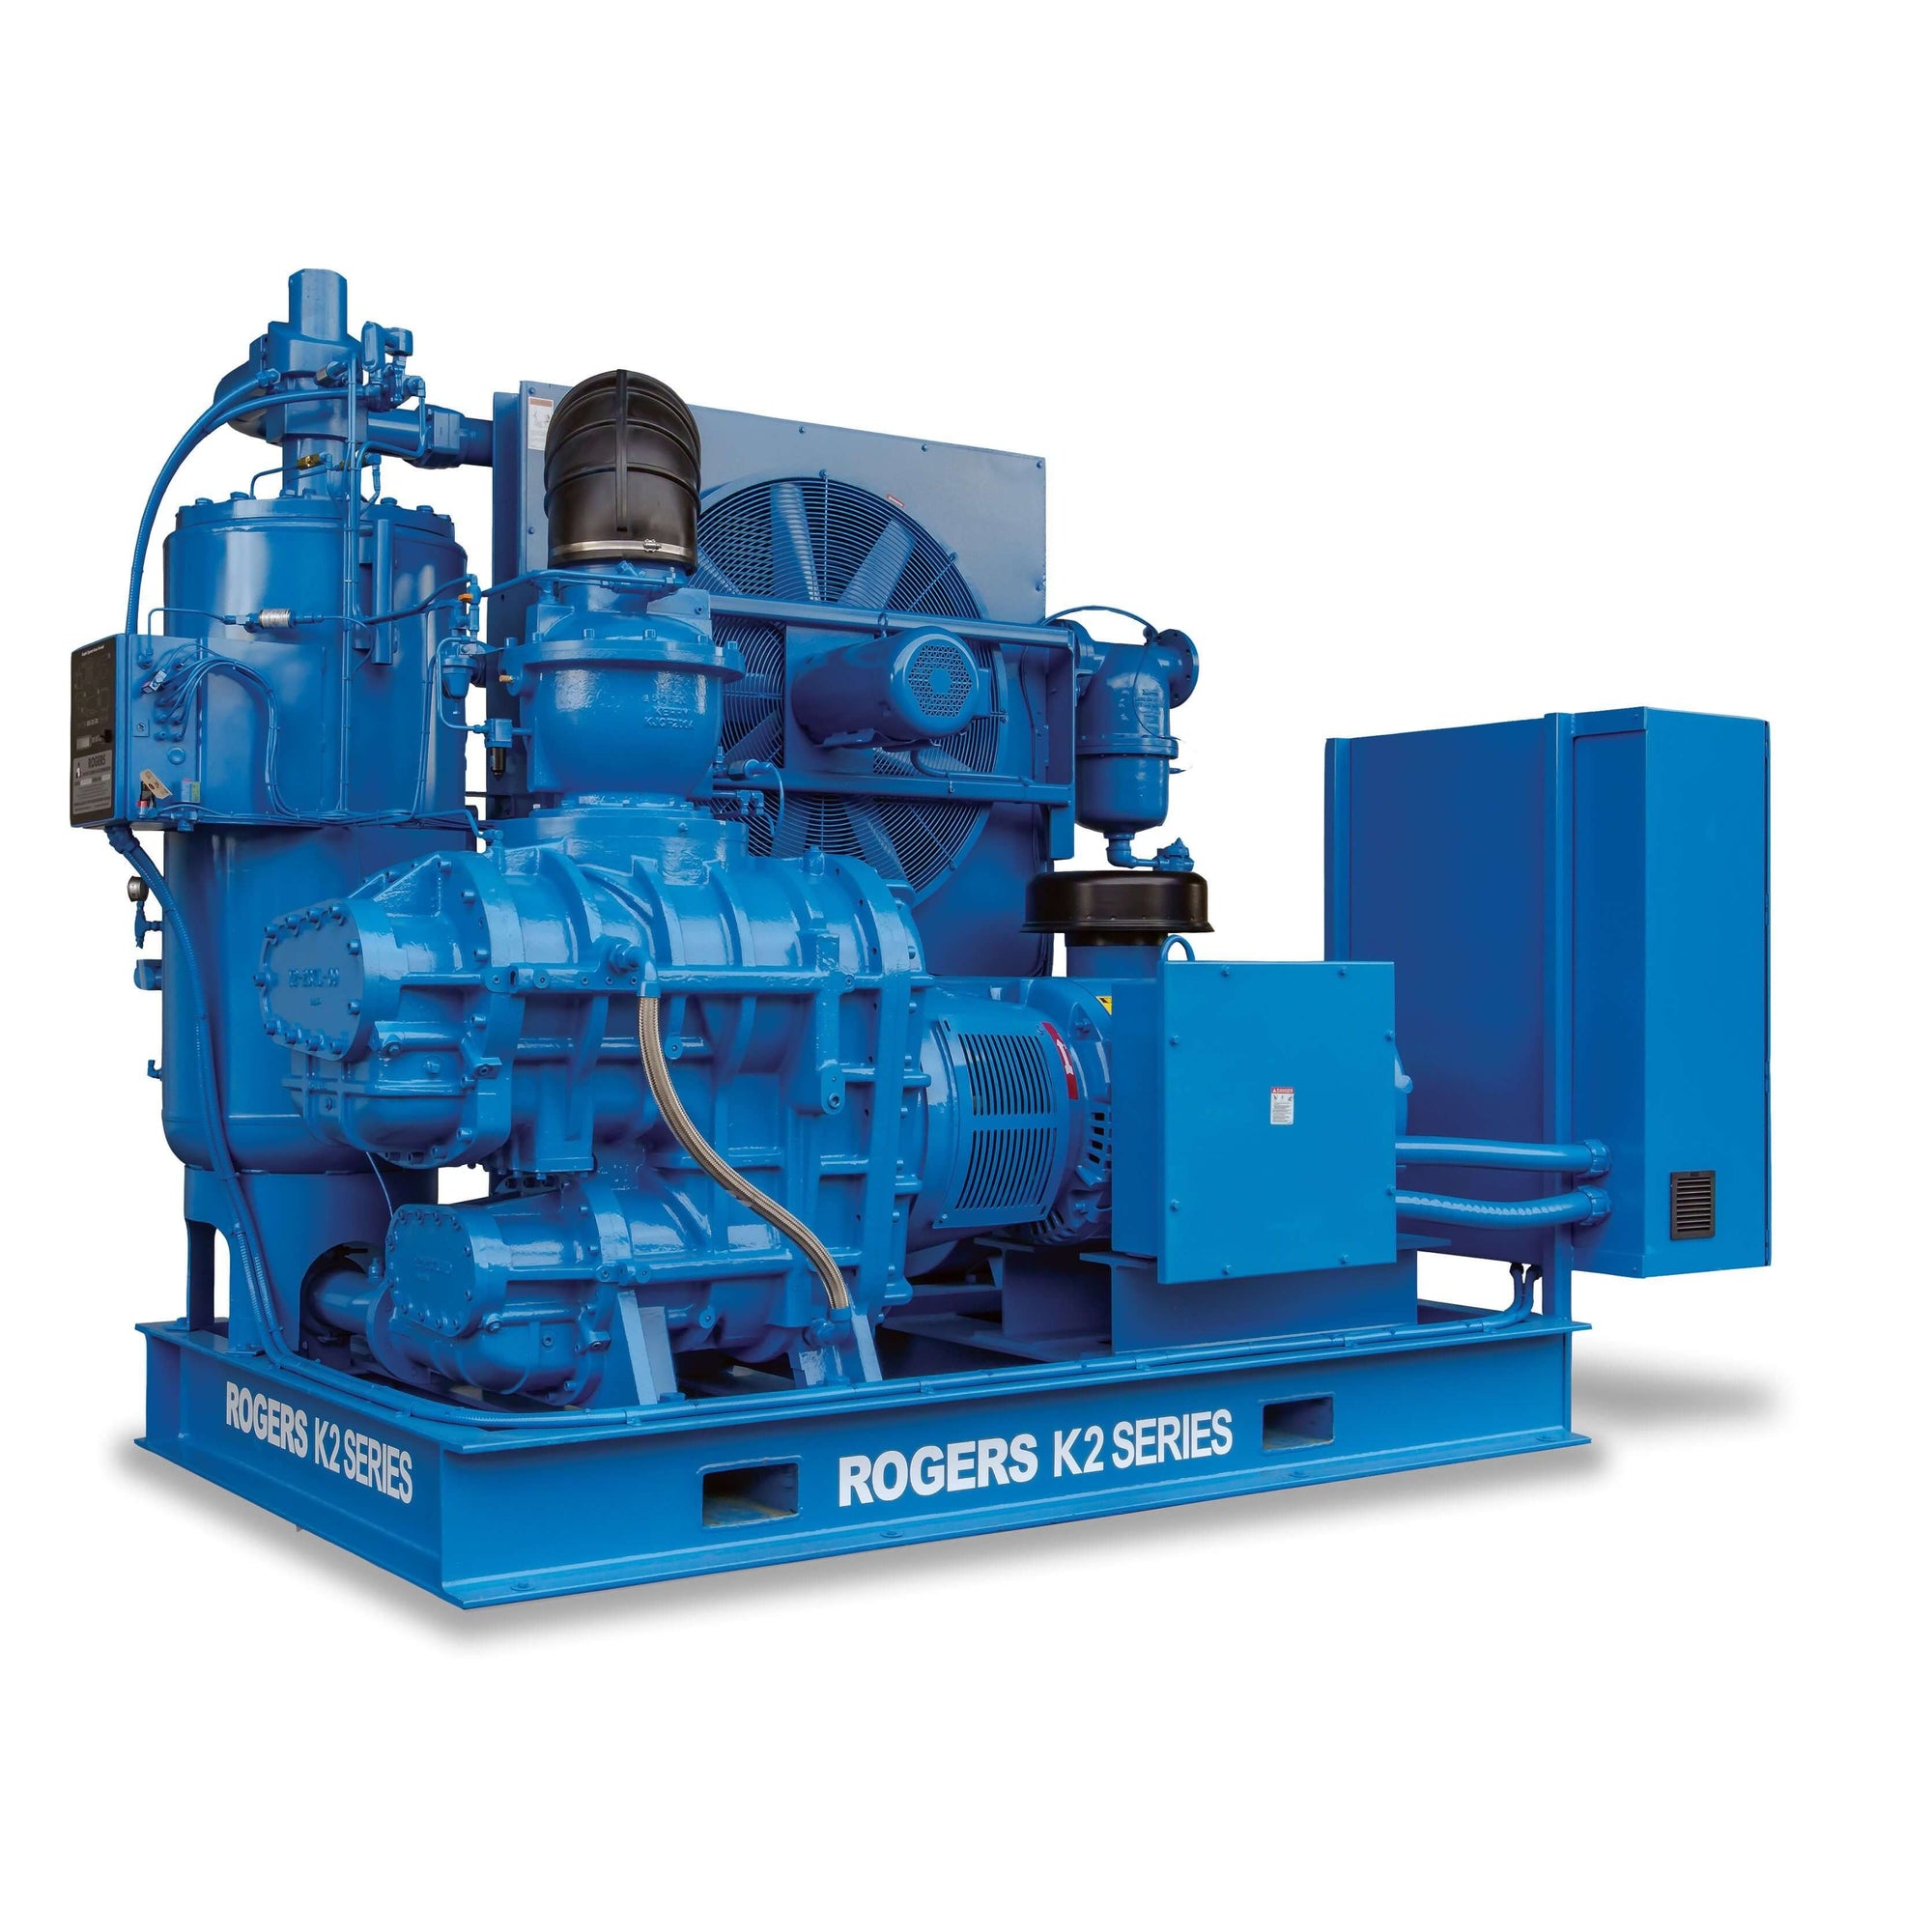 Rogers Rotary Screw Air Compressor - K2/K2V Series K2/K2V-Series 0-99PSIG, 100-124PSIG, 100-199HP, 100-199SCFM, 1100+SCFM, 125-149PSIG, 150-199PSIG, 200-299PSIG, 200-499HP, 200-499SCFM, 500+HP, 500-799SCFM, 800-1099SCFM, a/c, fixed, ind_aerospace, ind_automotive, ind_glass&plastics, ind_manufacturing, ind_mining, ind_municipalities, ind_package, ind_water-treatment, ind_wood-products, k-series, lubricated, rogers-machinery, rotary-screw, show_manufacture_icon, vfd, w/c